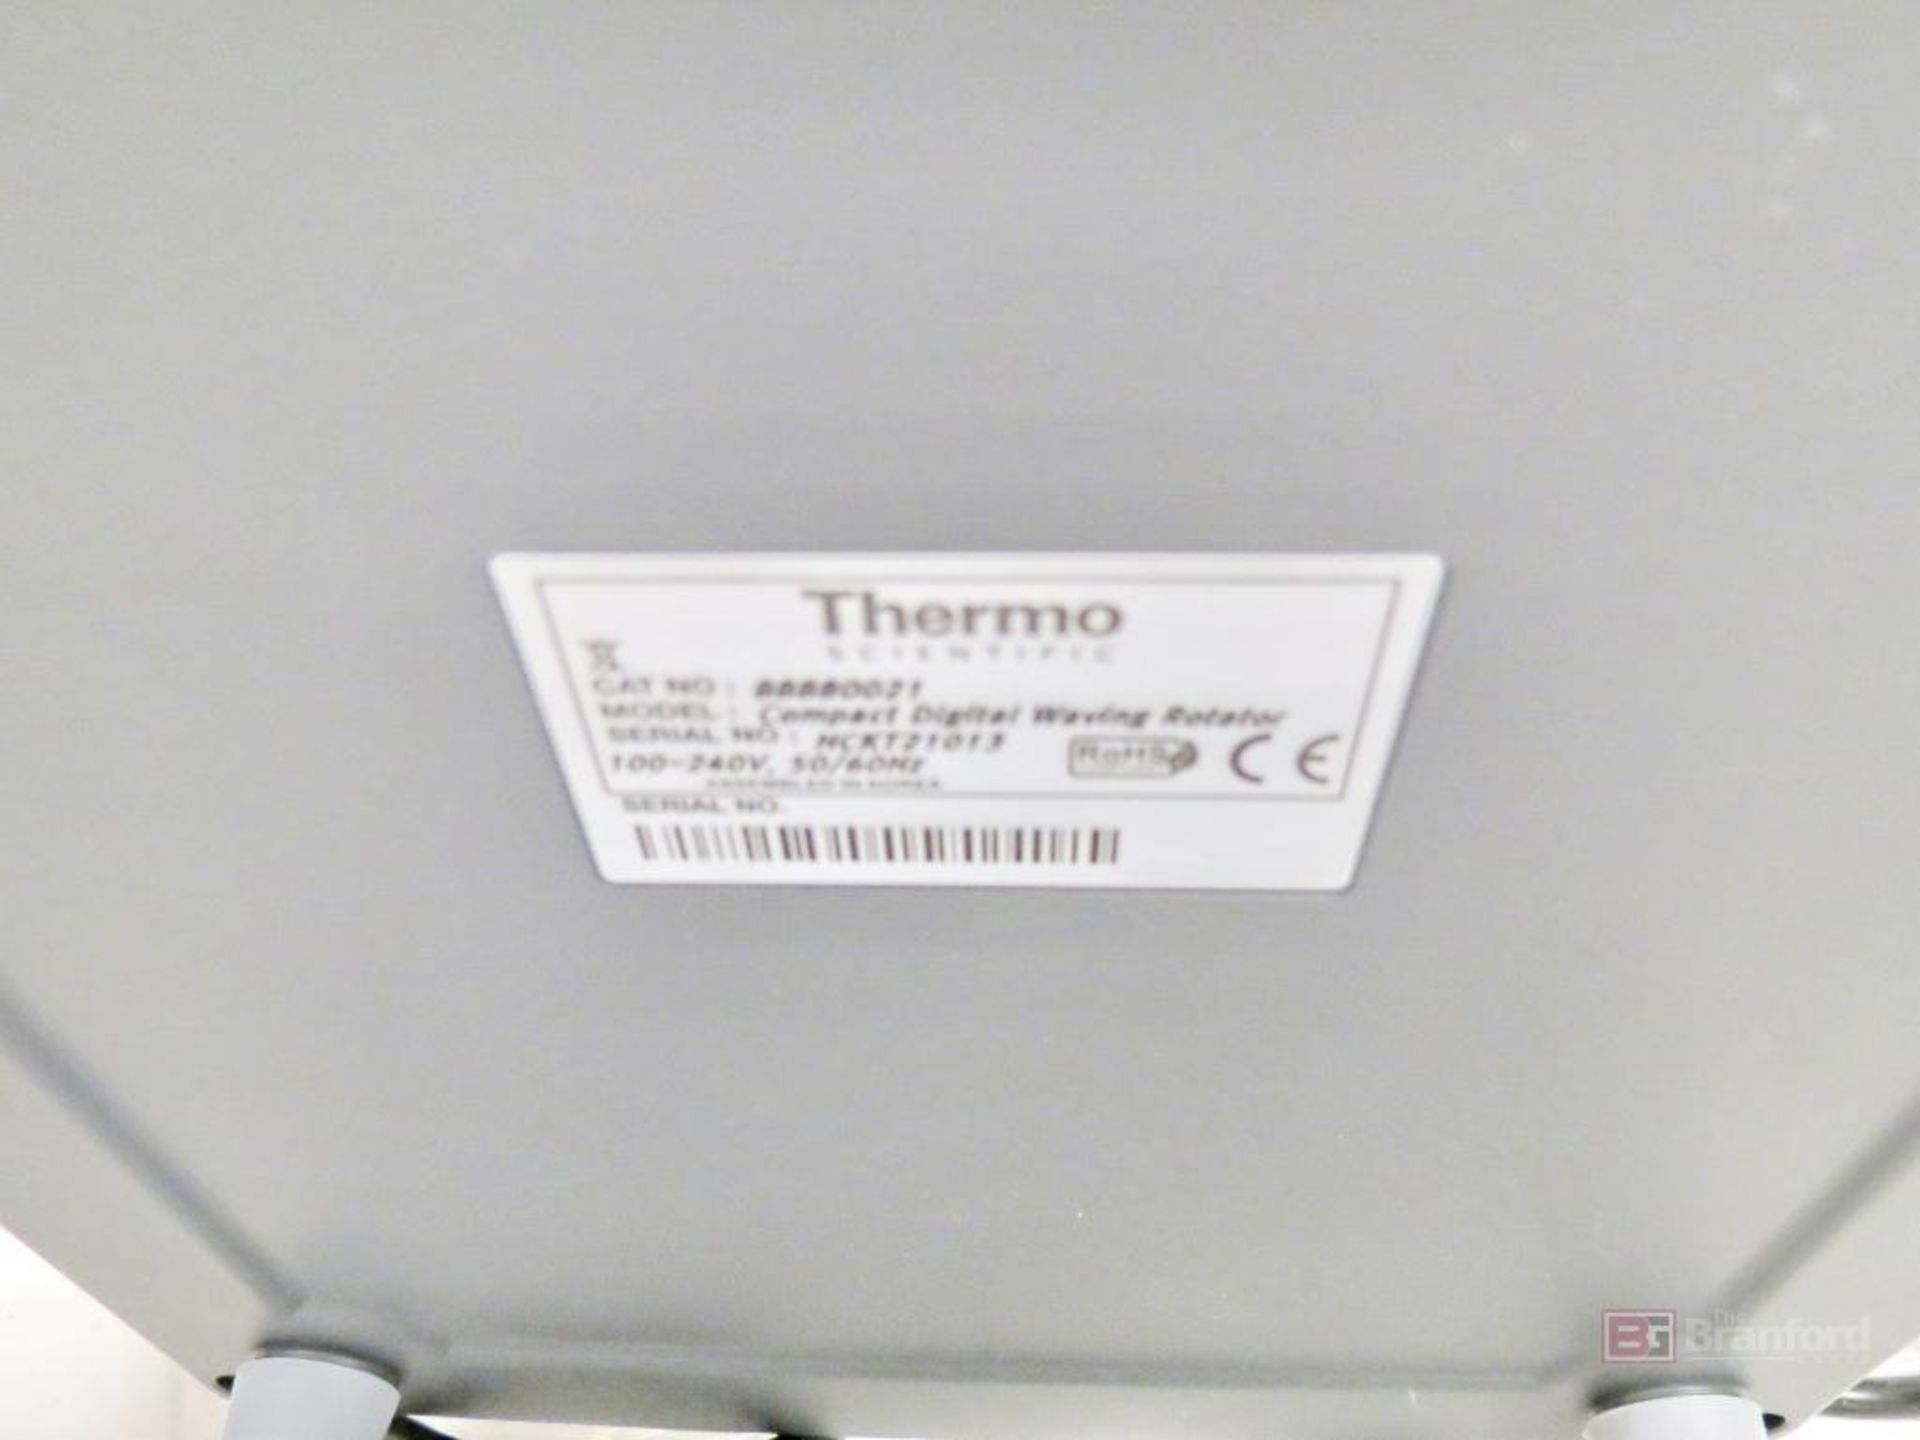 Thermo 8888021 Compact Digital Rotating Wave Shaker - Image 2 of 2